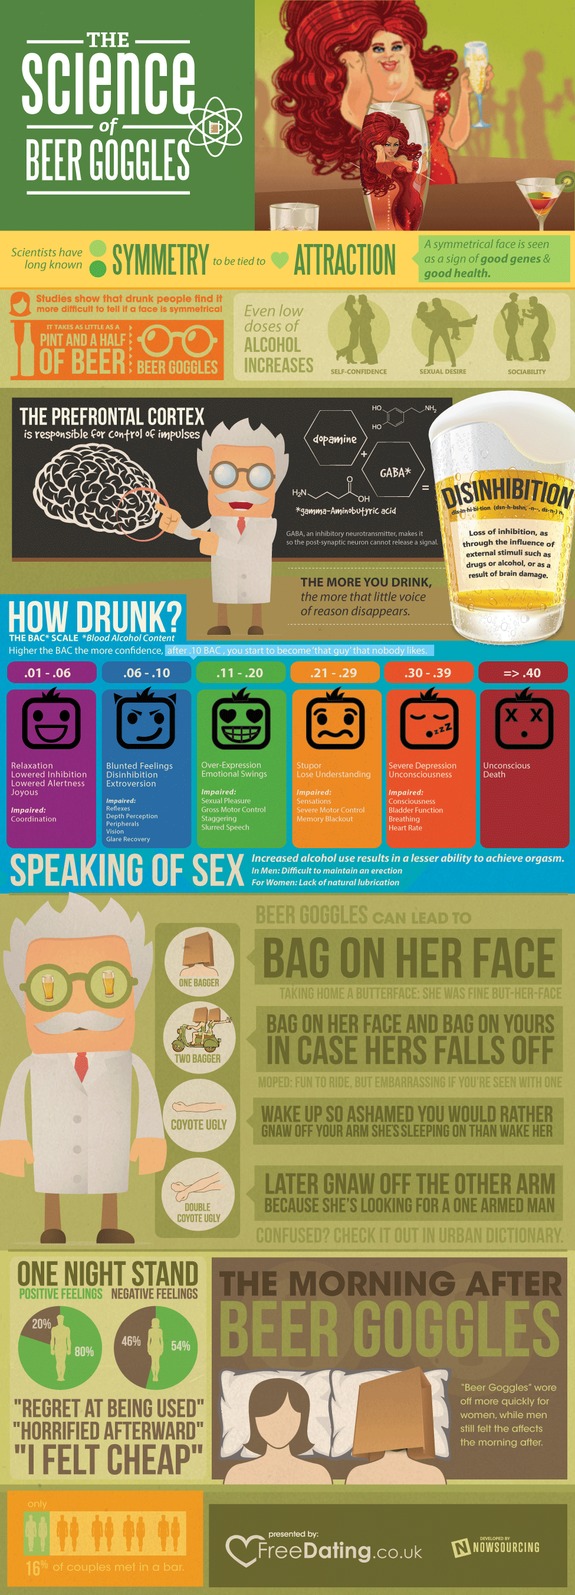 The Science of Beer Goggles | Infographic Directory